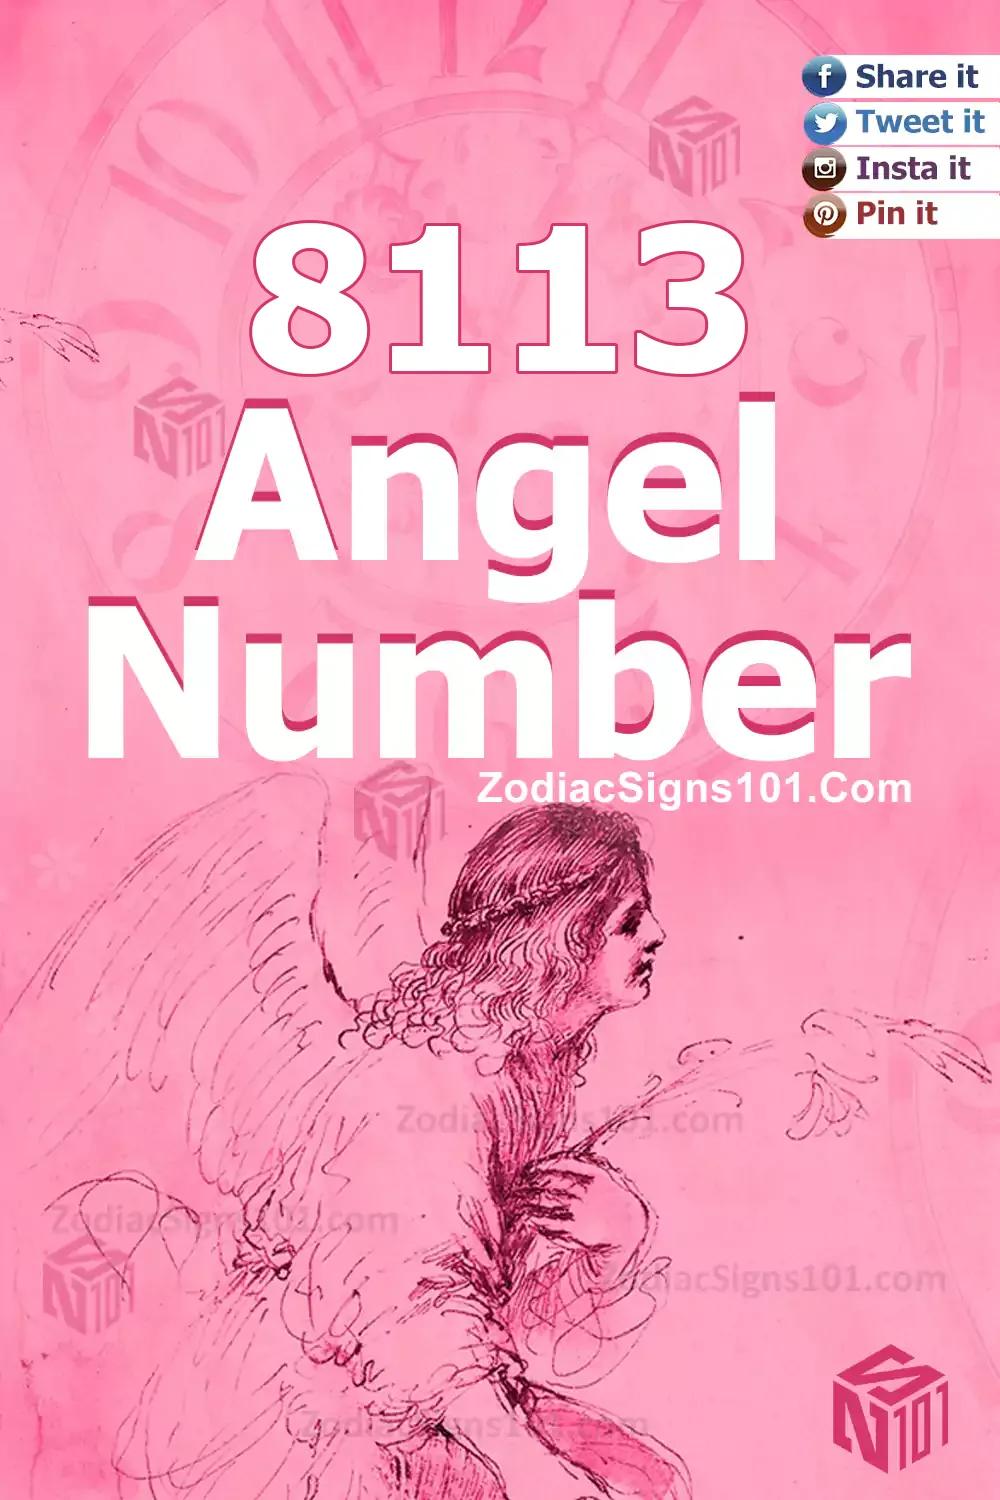 8113 Angel Number Meaning